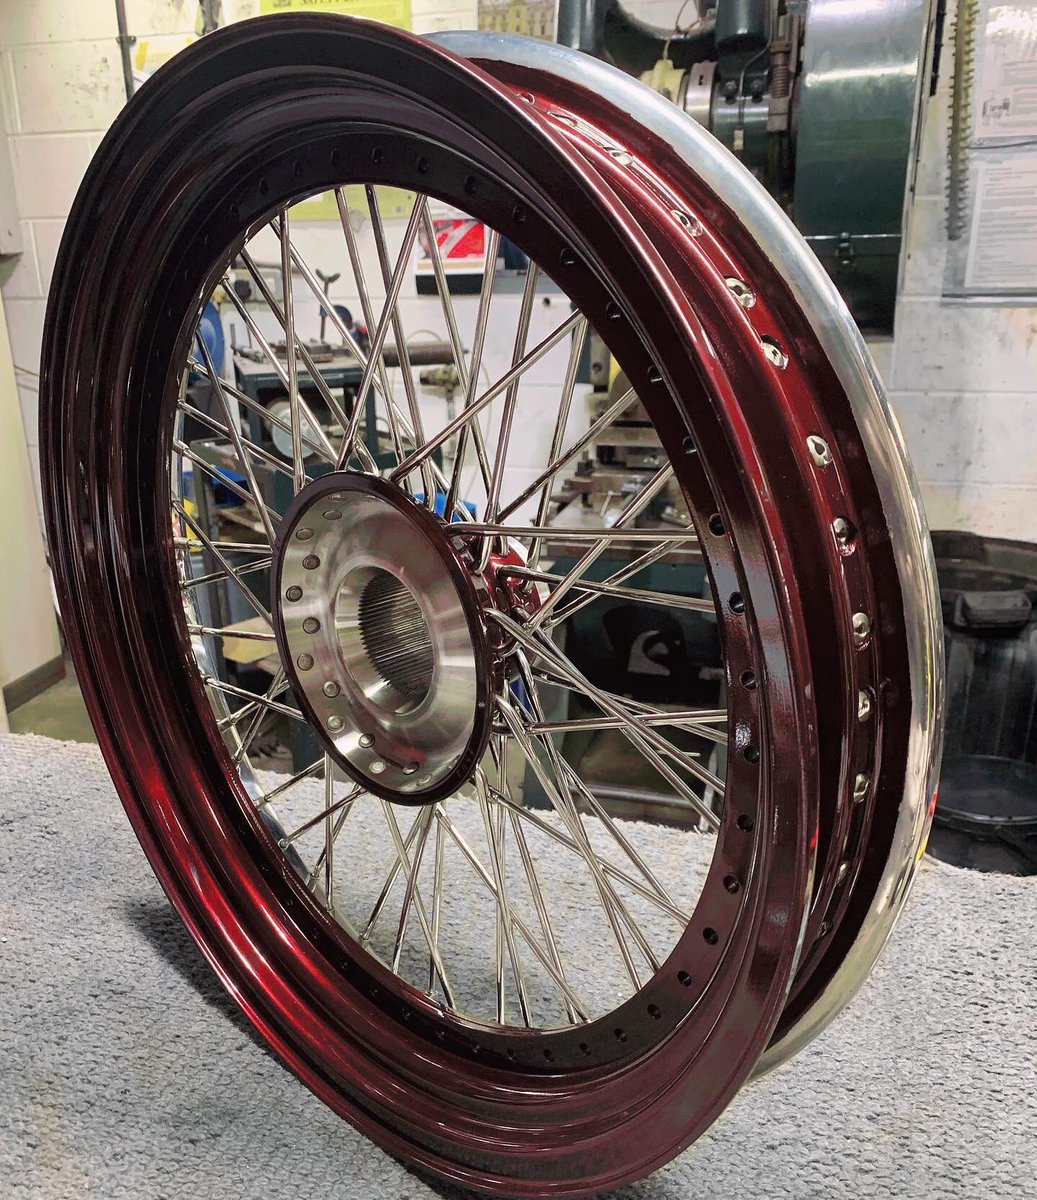 The 5 speeder wheels are now trued and just awaiting the cap head screws to be polished and bolted in.
turrinowheels.com
#Morgan3Wheeler
#turrinowheels #morgan #dutchmorgan #3wheeler #morganthreewheeler #wirewheels #turrino #morganmotorcompany #vscc #montlery #brooklands